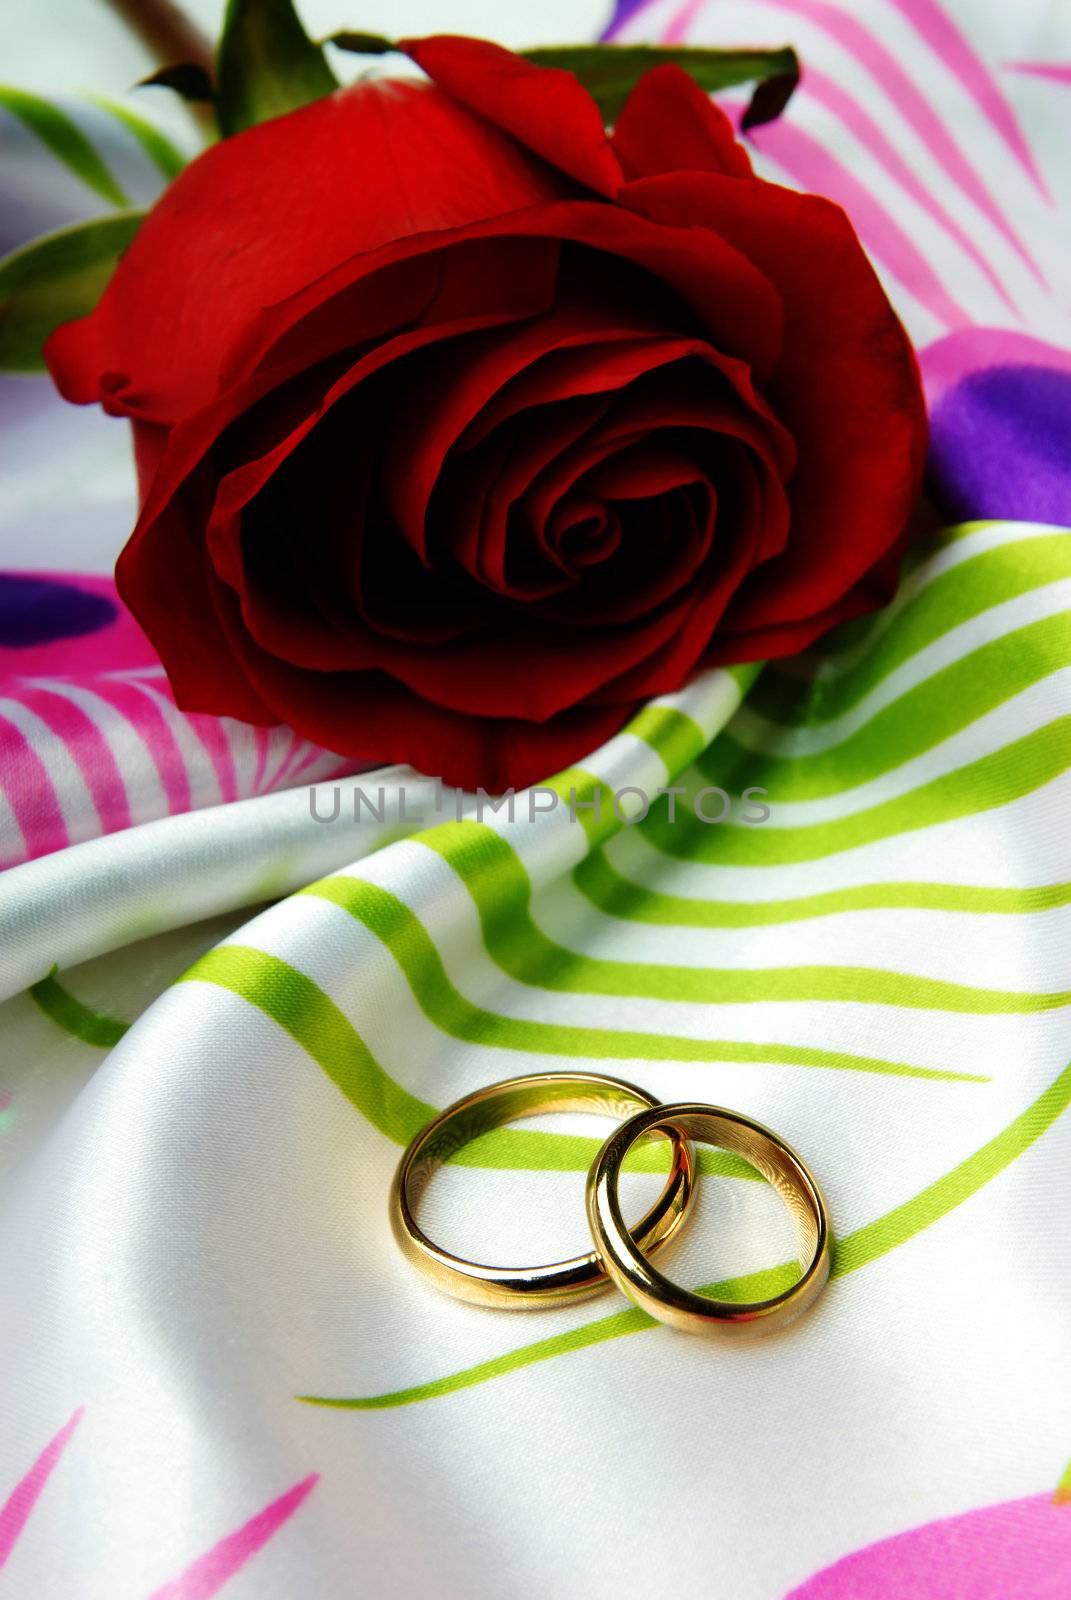 Photo of the one rose and two wedding rings of decoratic textile